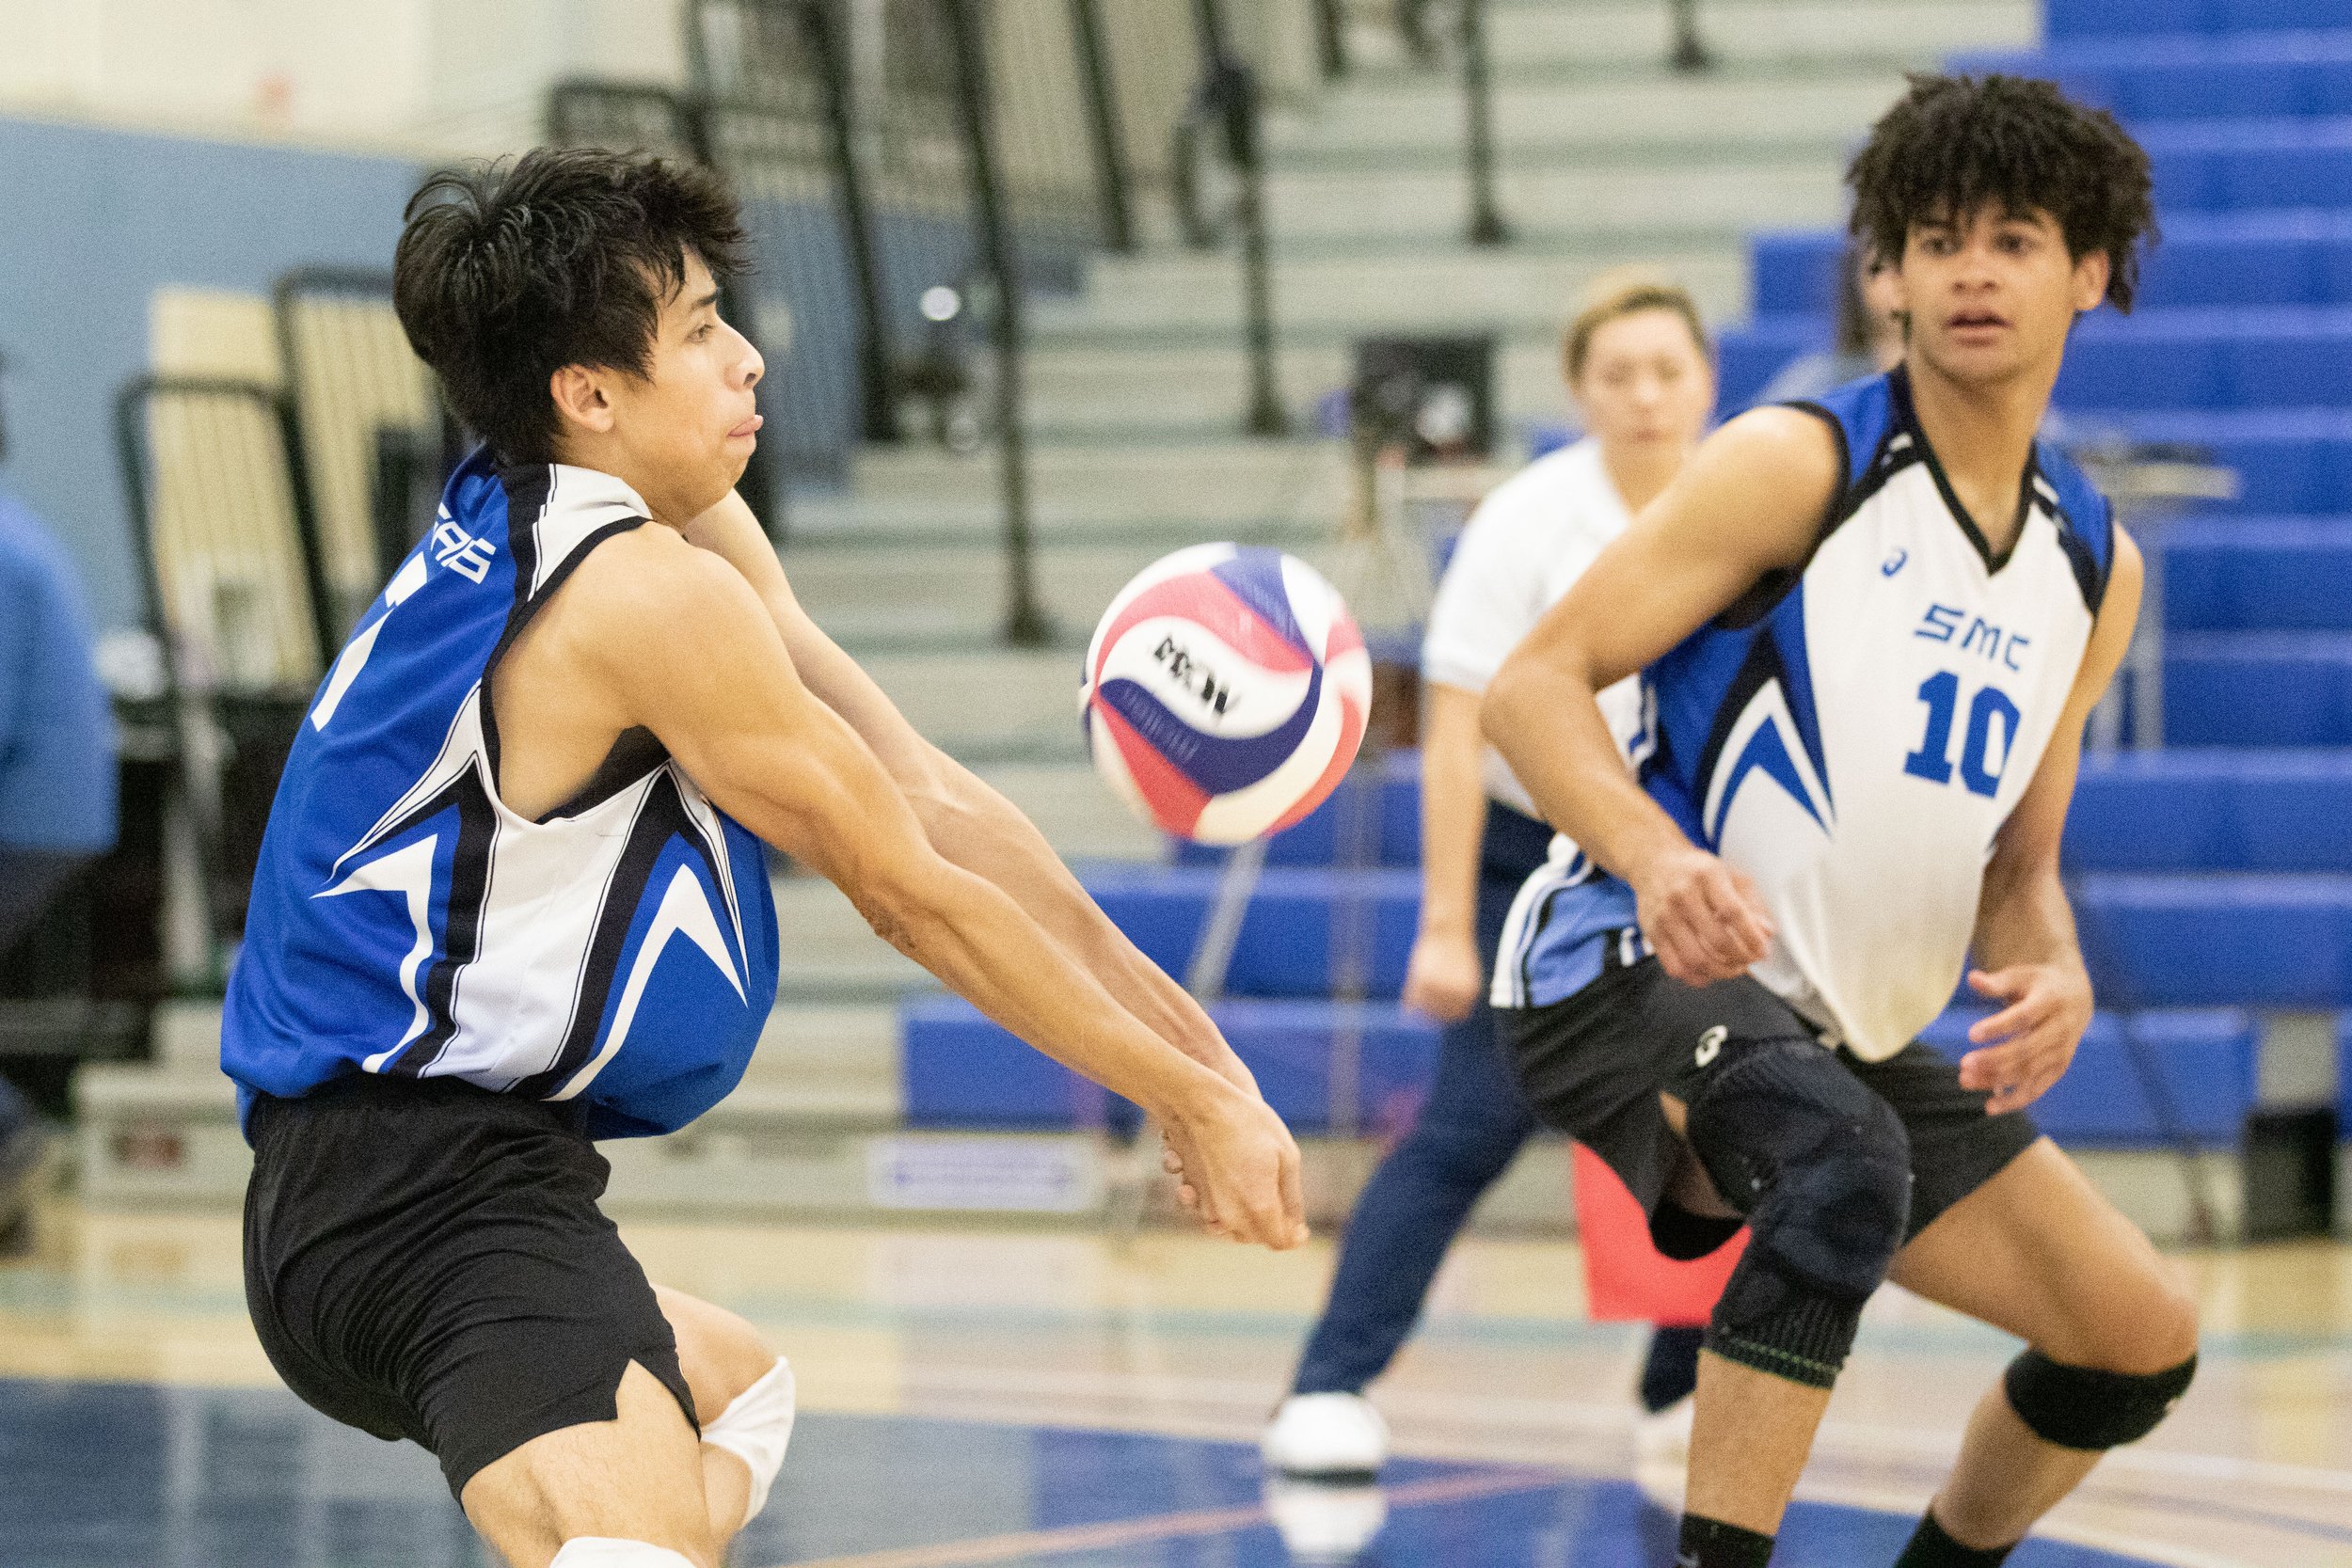  Santa Monica College Corsair libero Javier Castillo (7) hitting the ball after it was served by Long Beach City College Vikings during the second set of a home game in Santa Monica, Calif., on Friday, March 3, 2023. The game resulted in the Corsair'